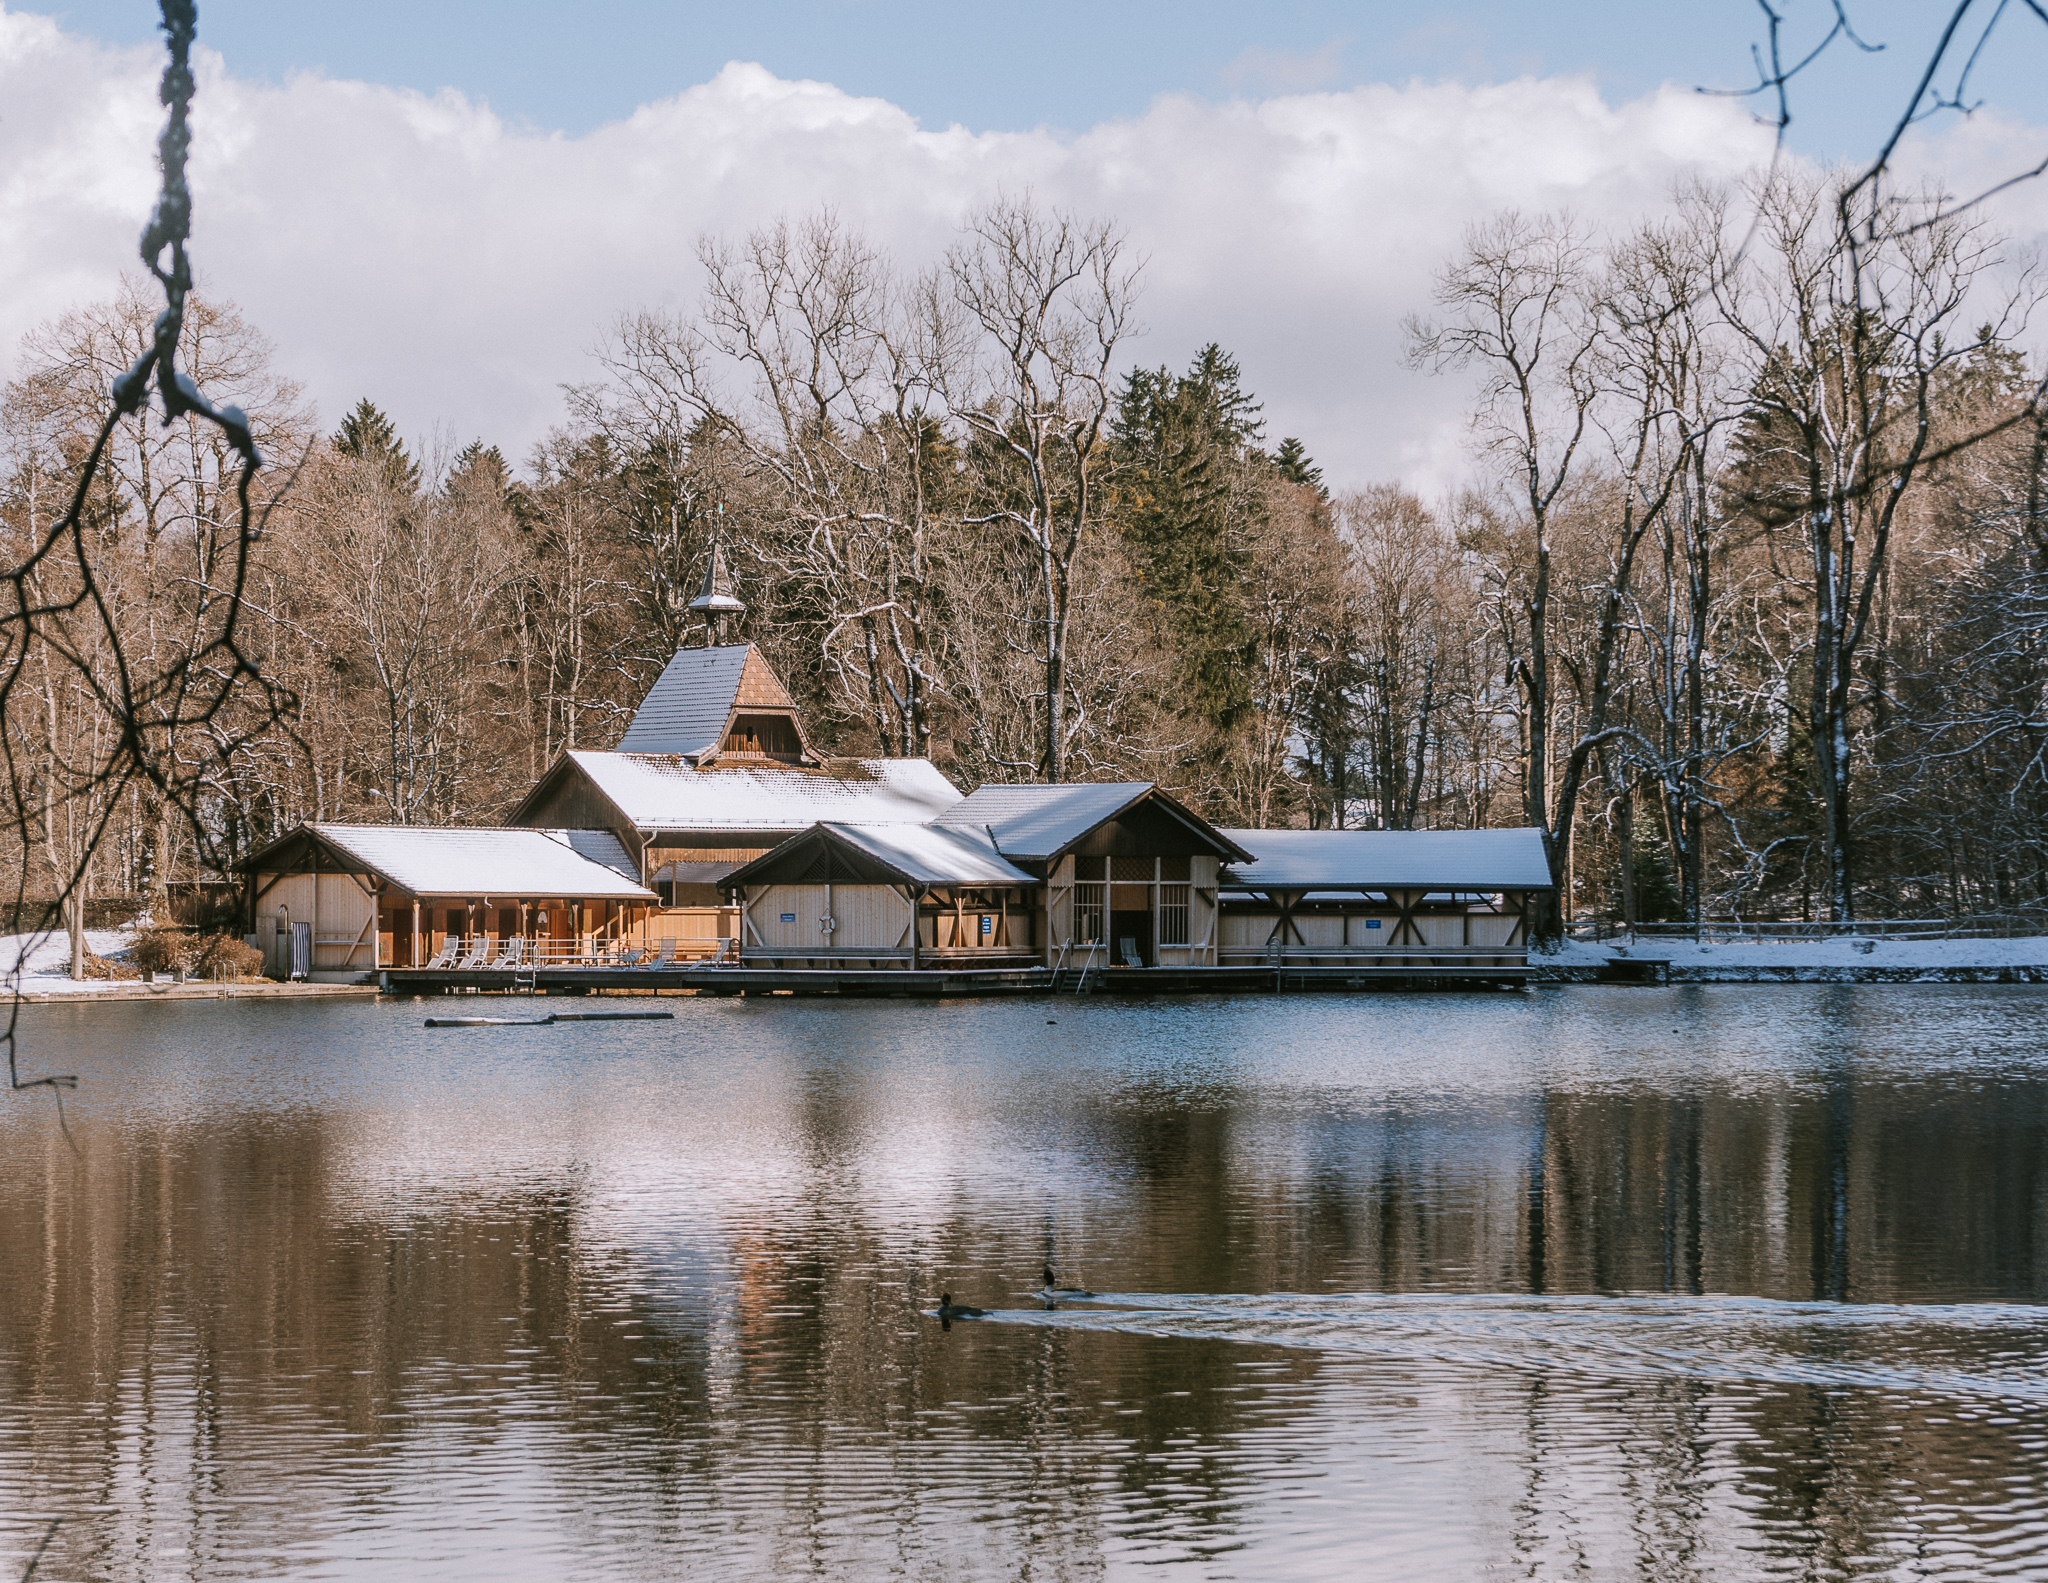 a view of the Weiere Sauna from the lake in winter, with snow on the roof and trees.